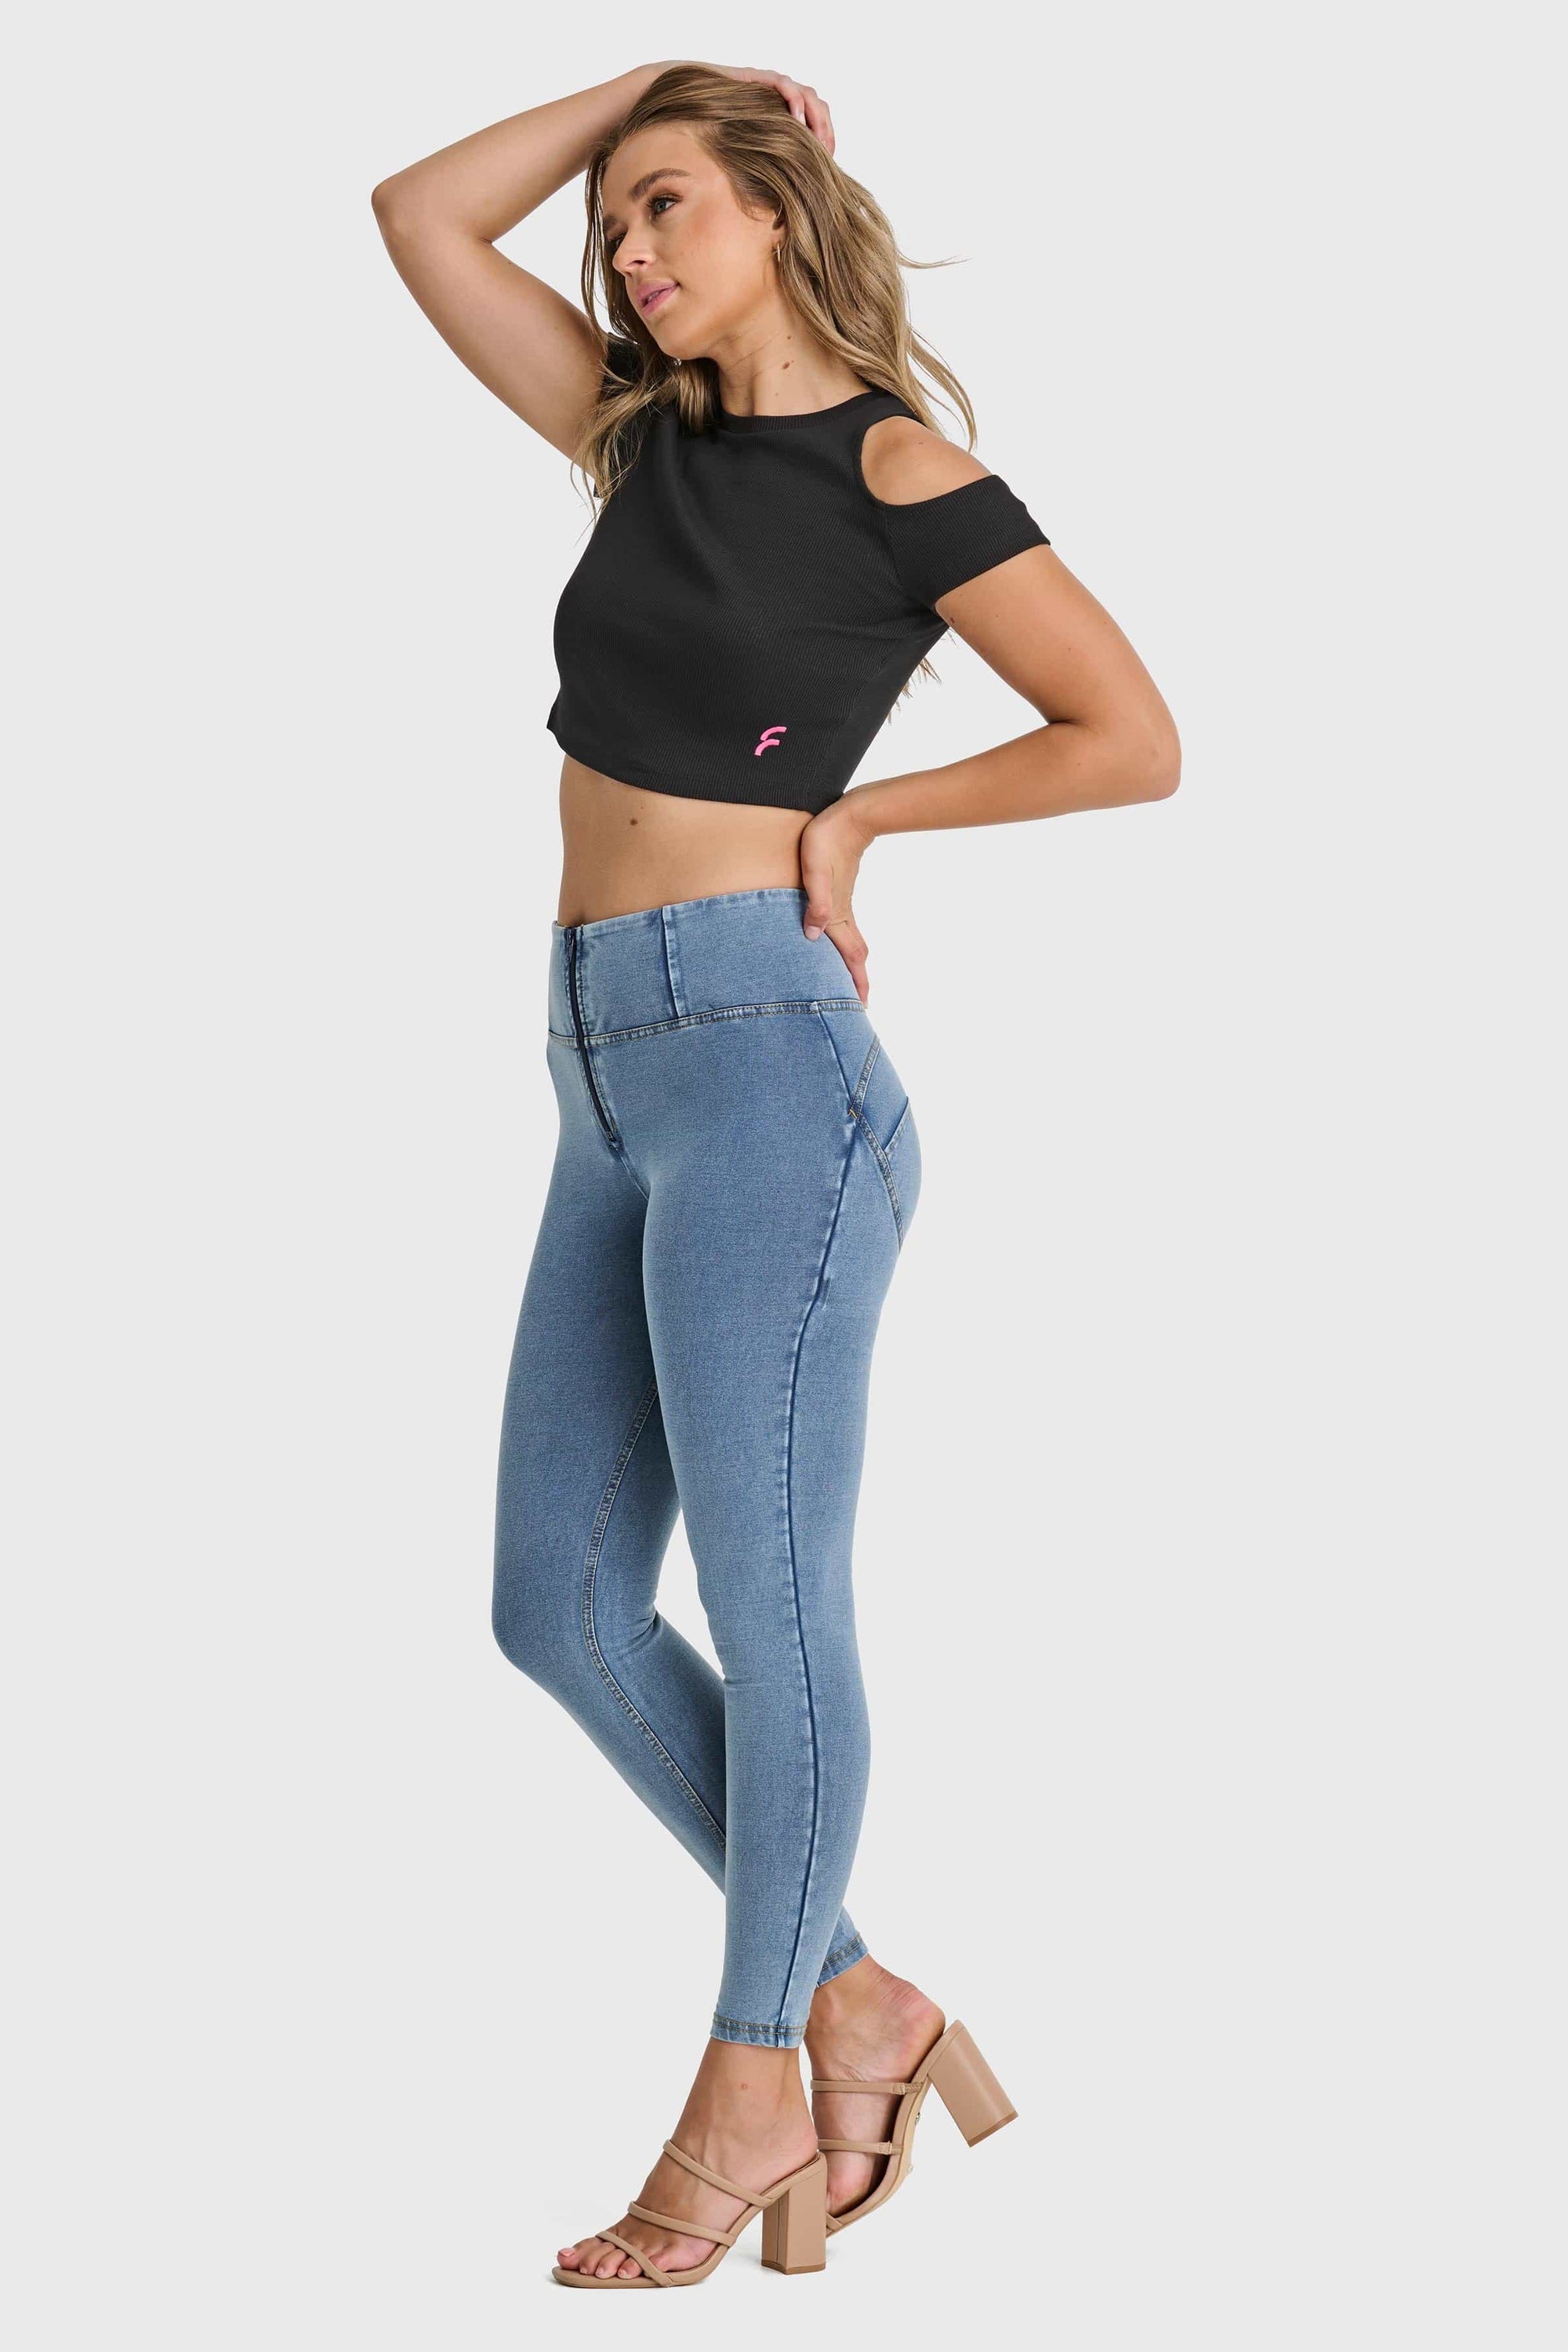 Cropped Cut Out T Shirt - Black 6